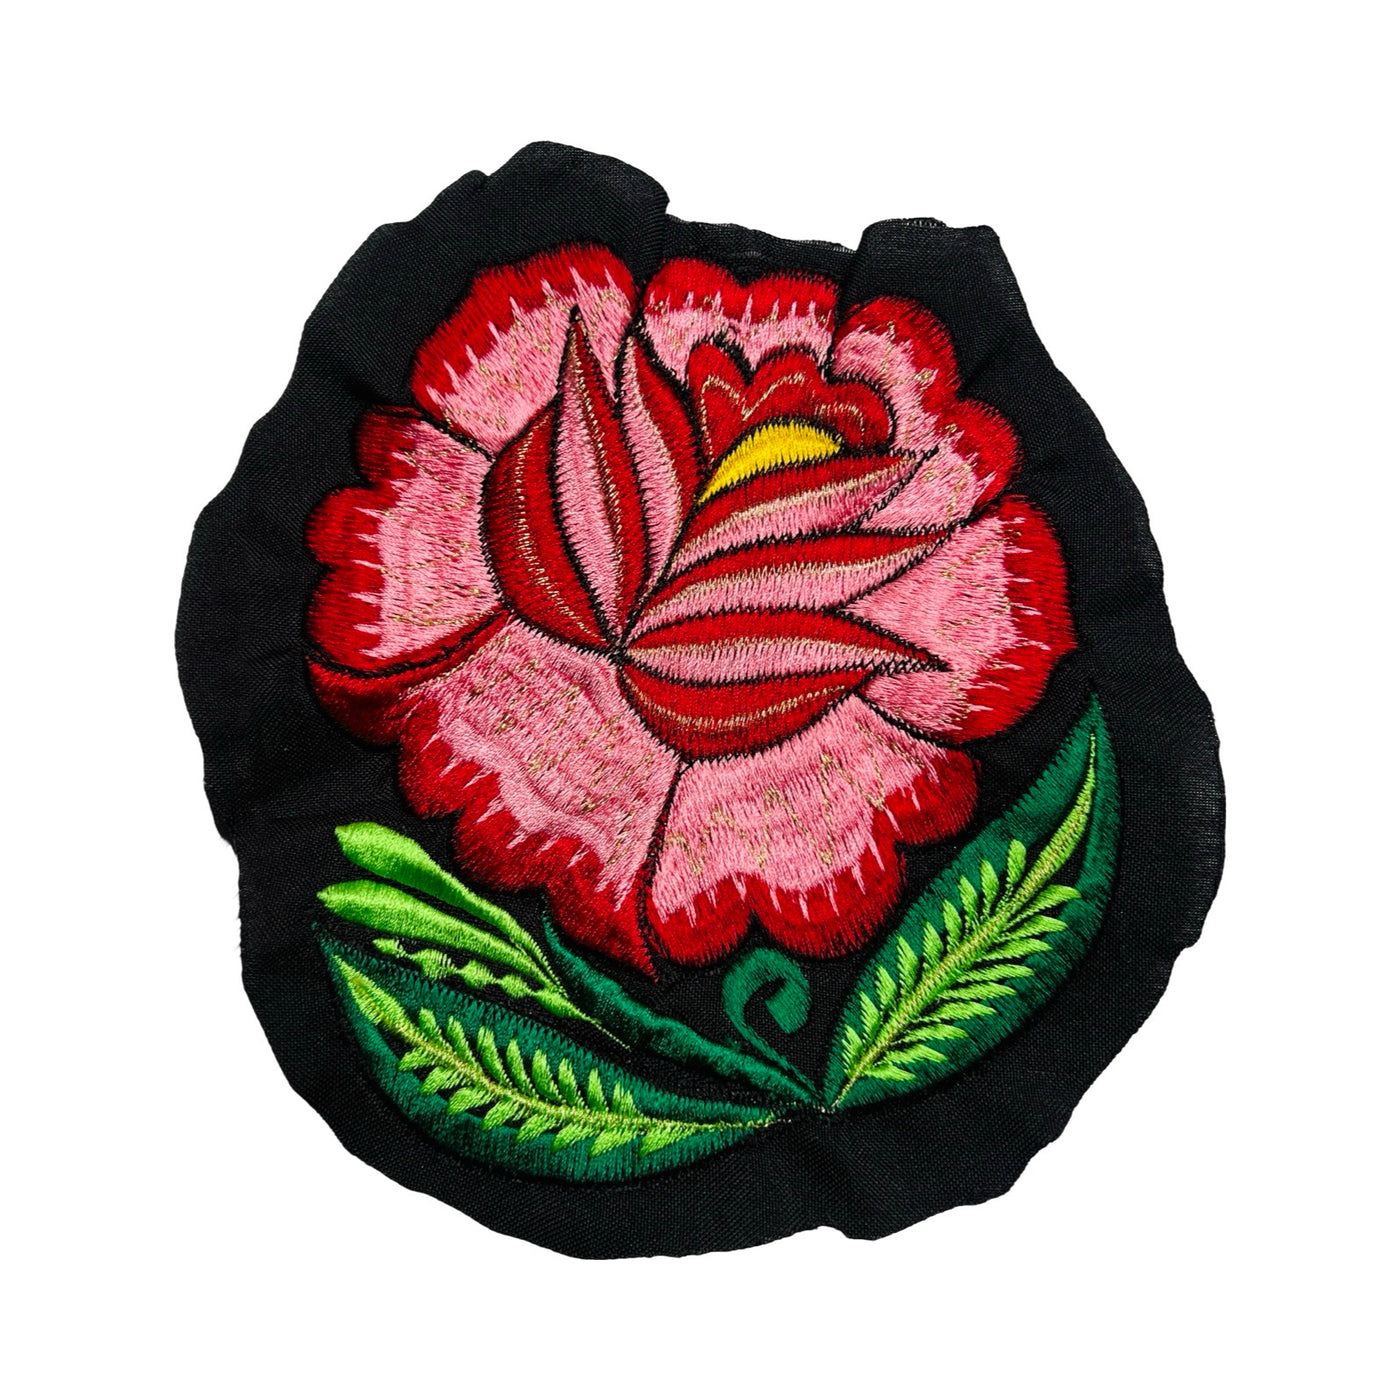 Woven red and light pink flower embroidered on black fabric.